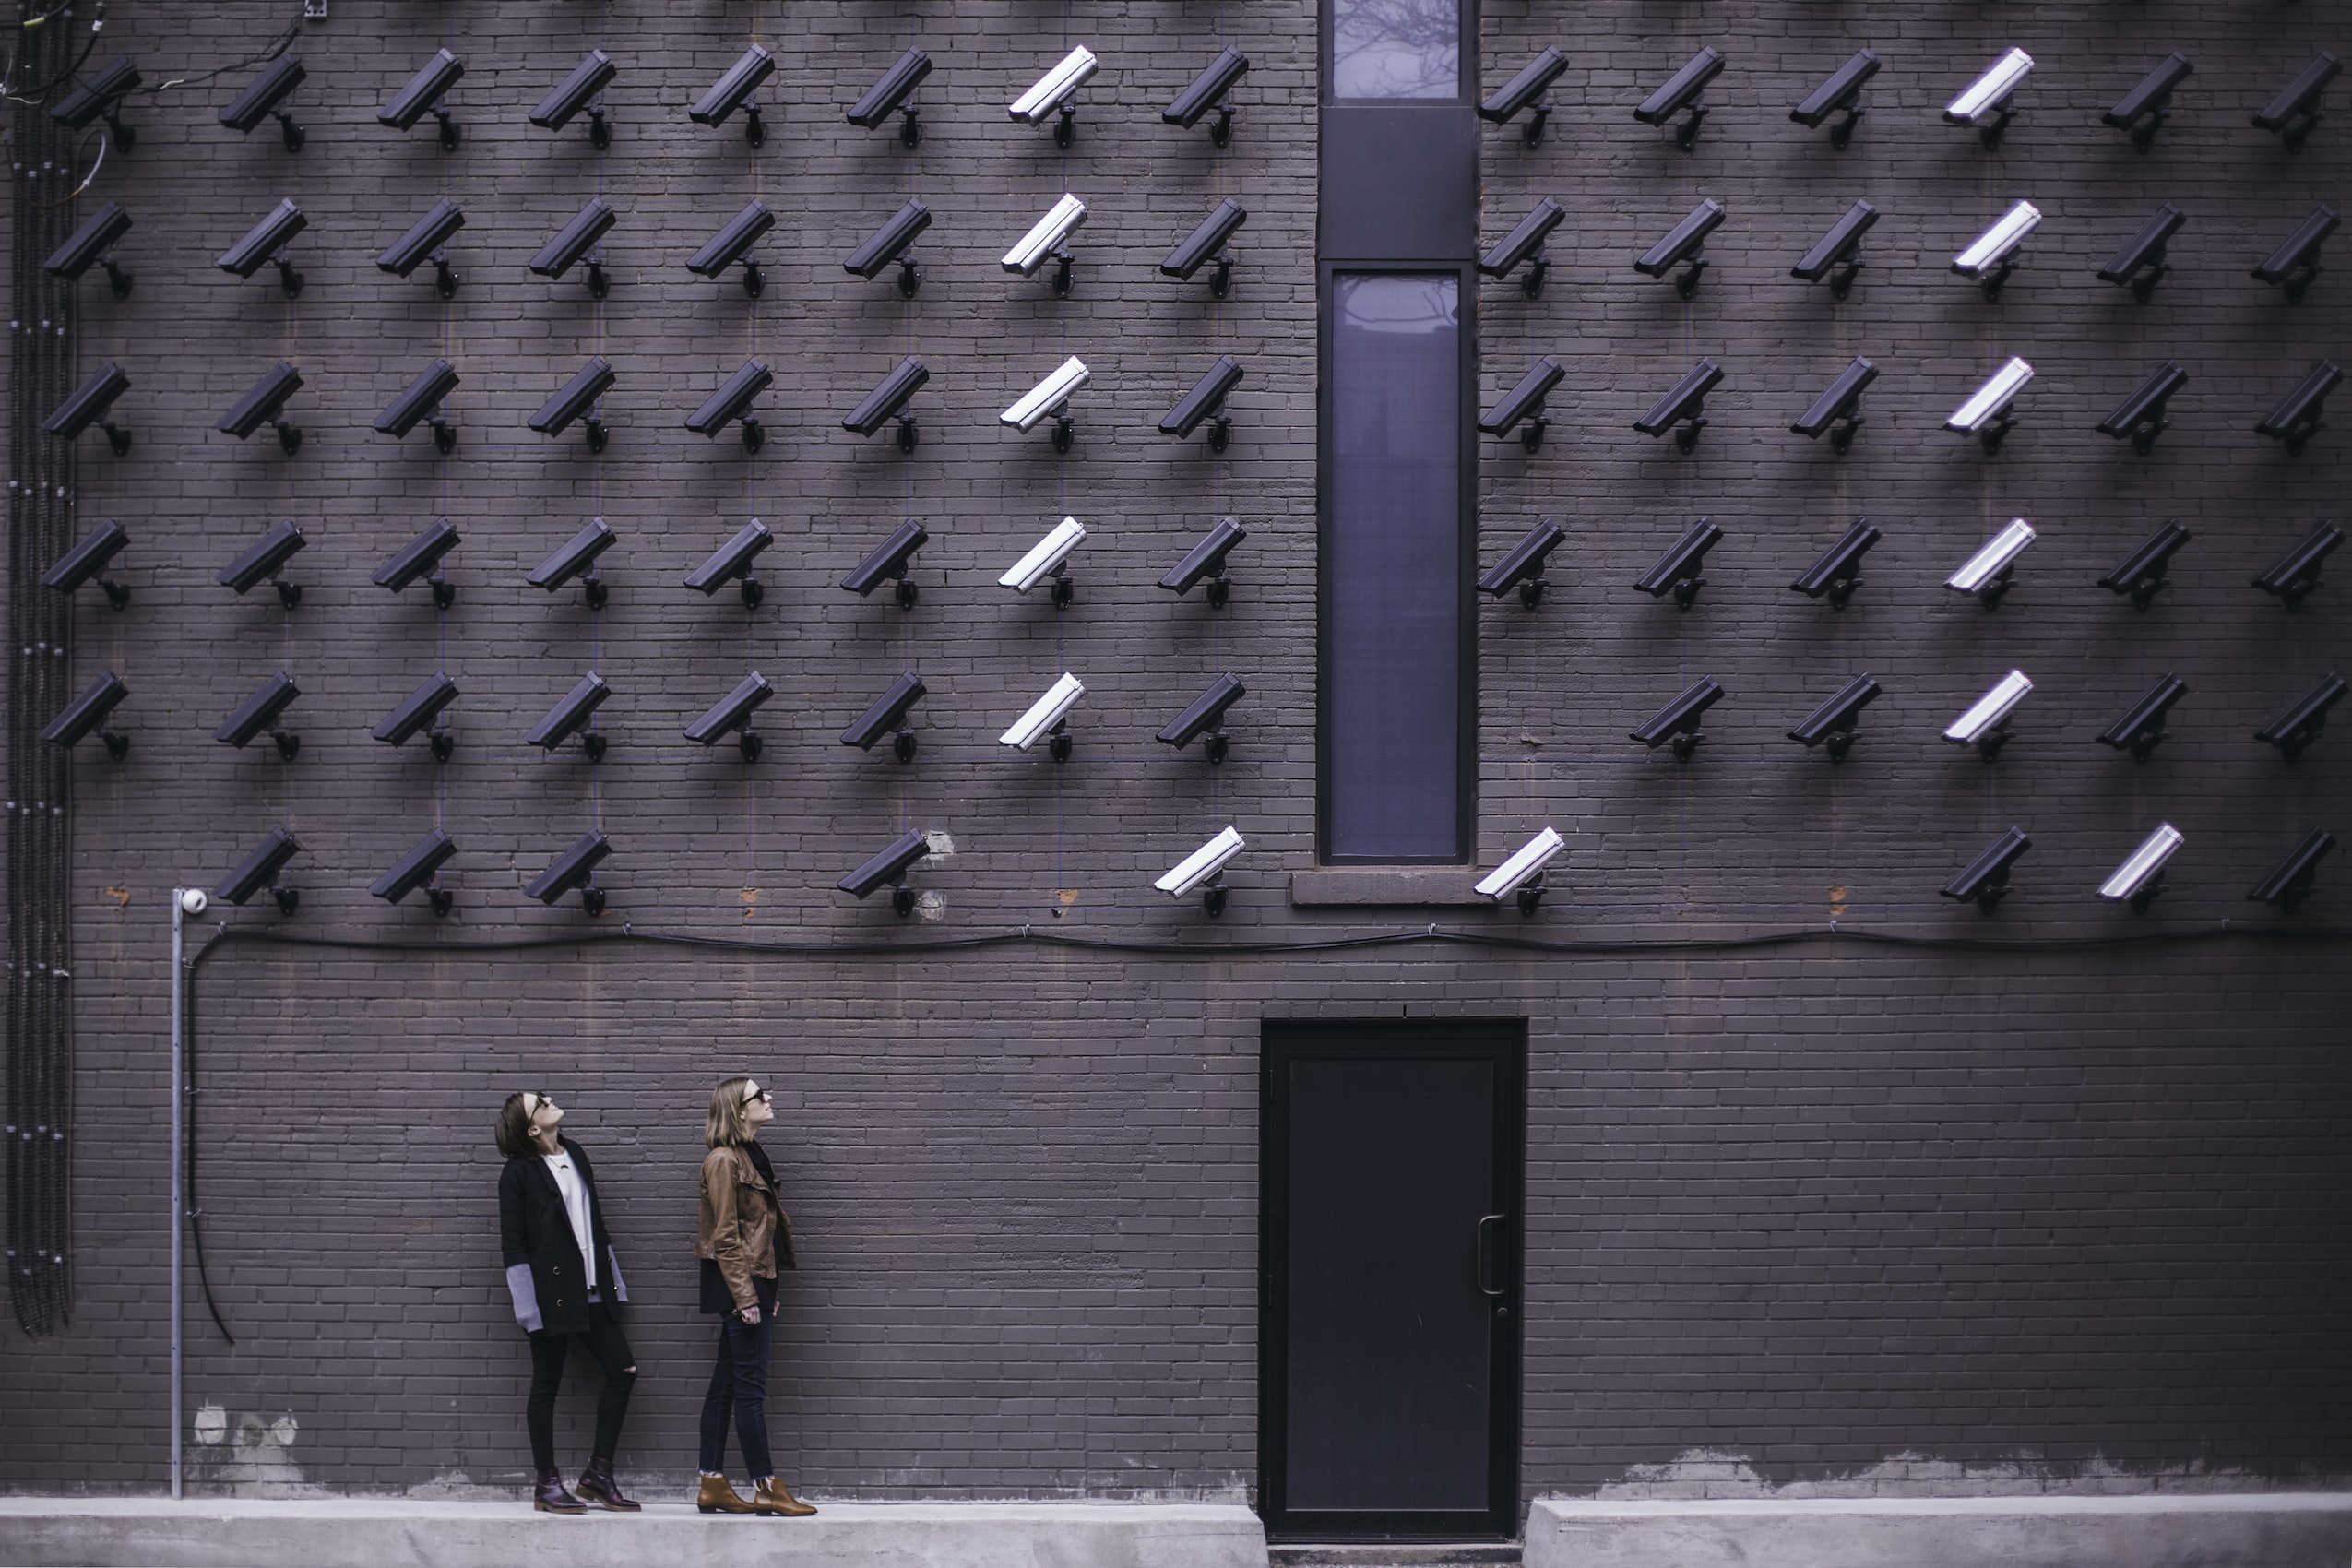 A wall of CCTA cameras watching two women, by Matthew Henry